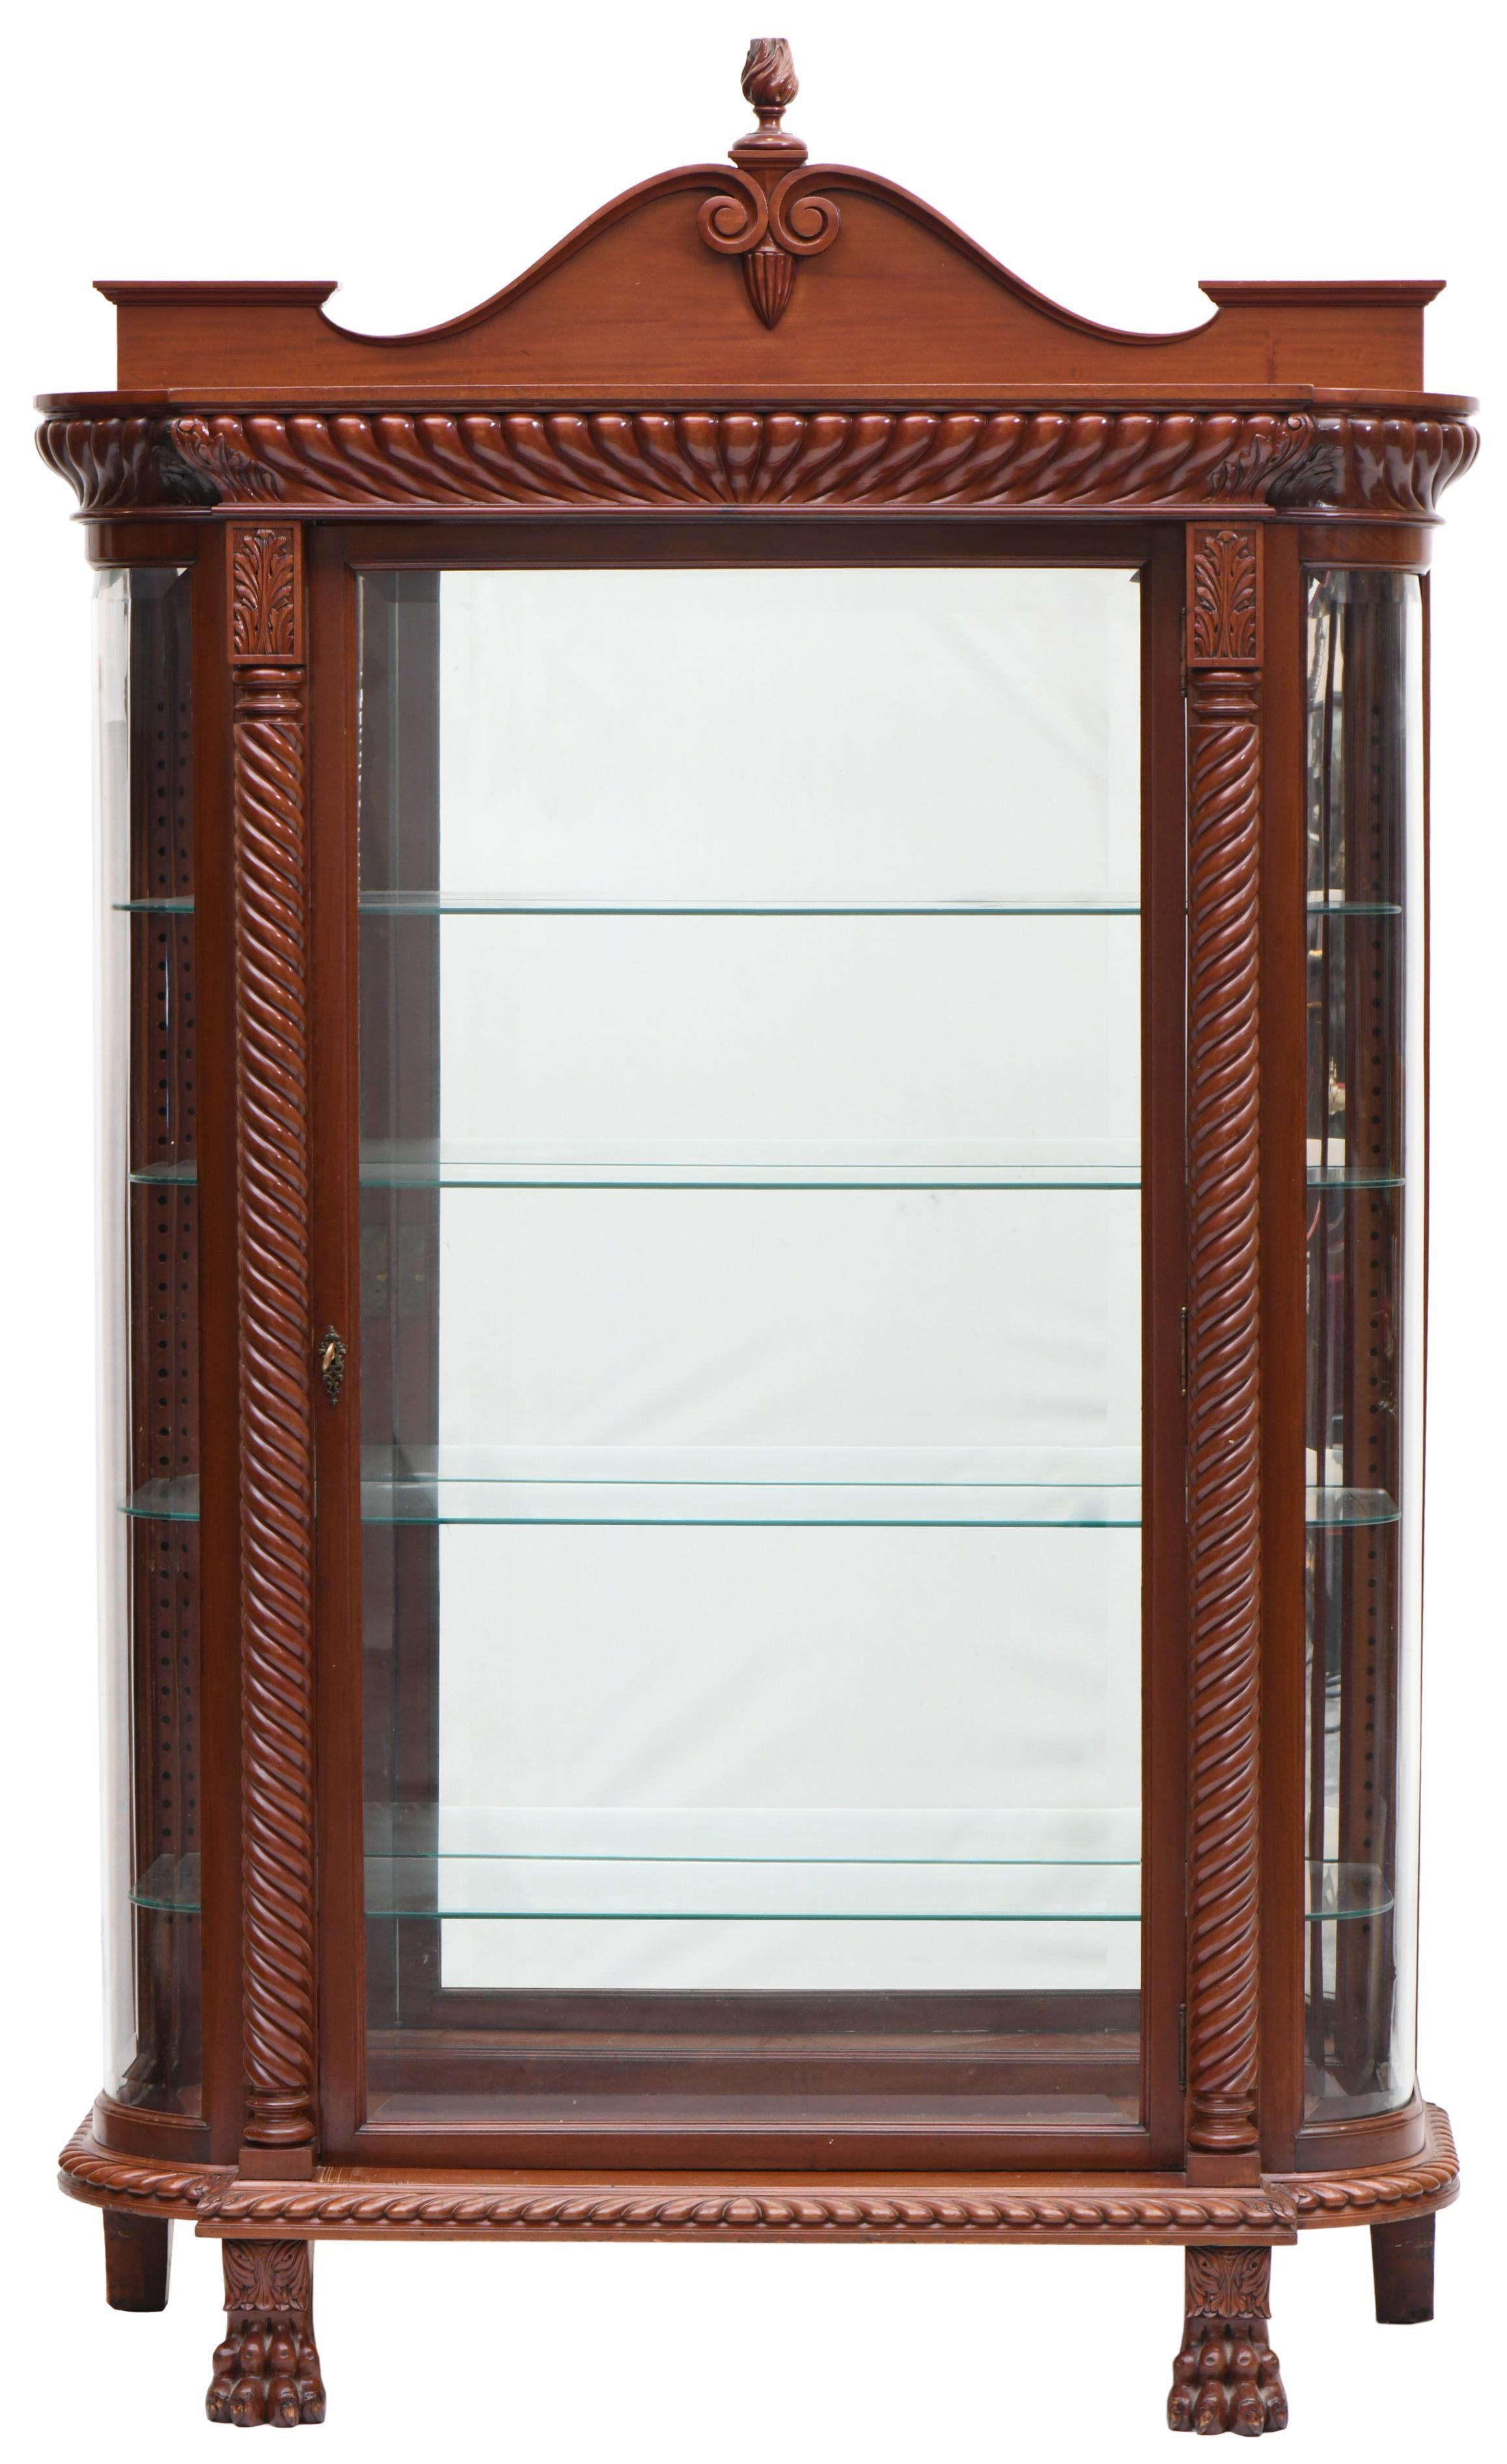 Mahogany Wood Beveled Glass Mirrored Back Cabinet / Vitrine By R.J.Horner For Sale 4